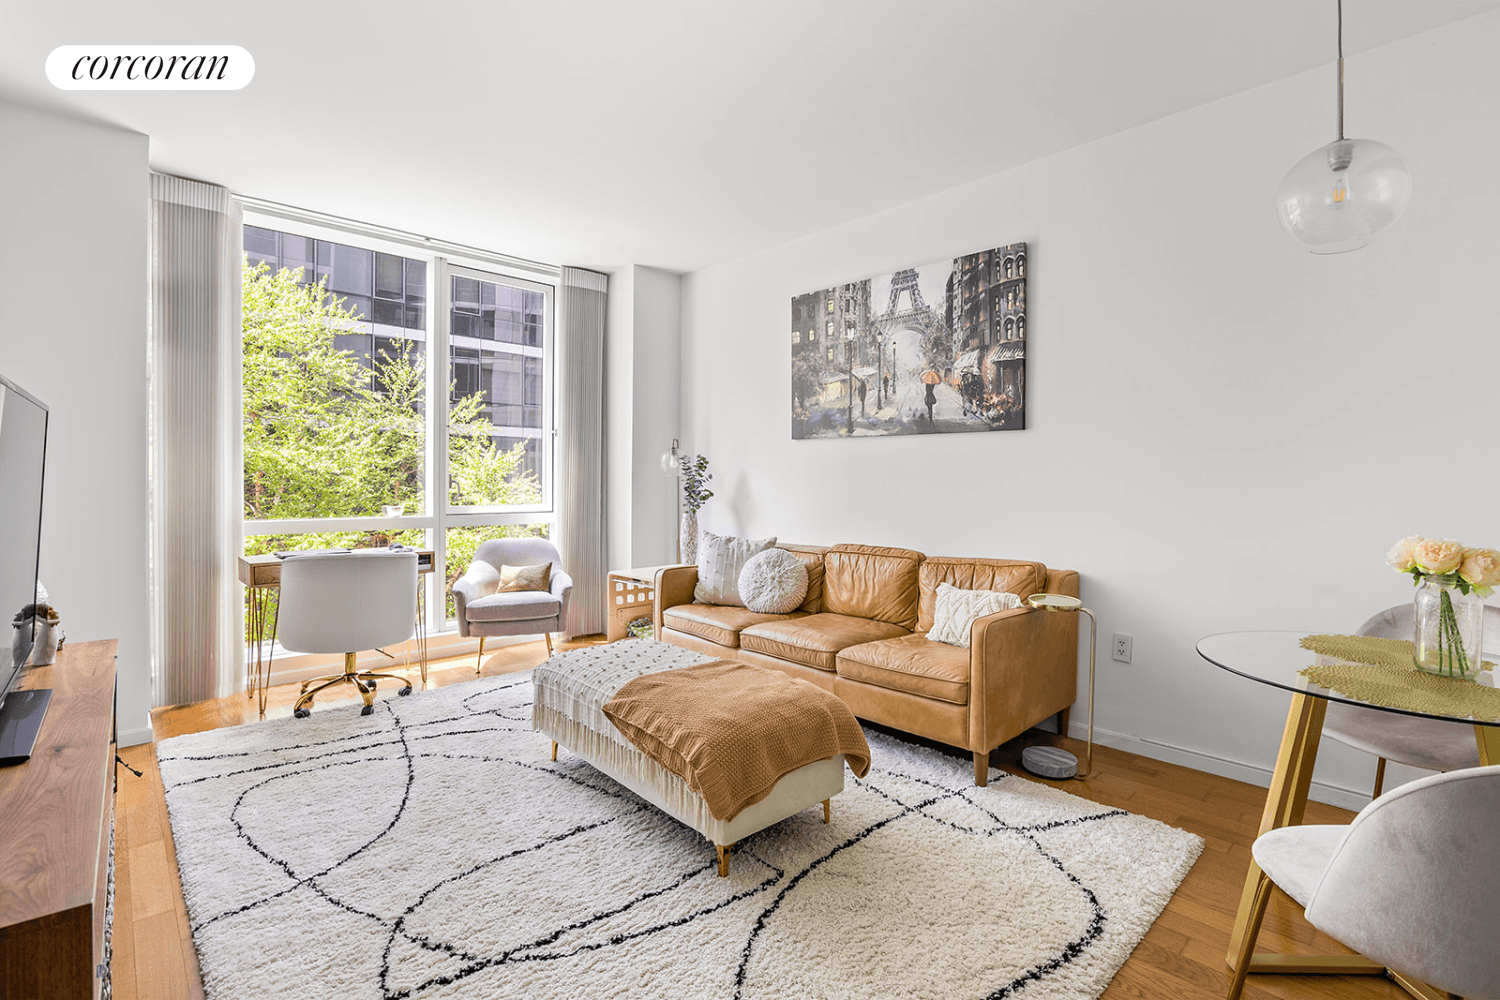 Beautiful and spacious loft like 1 bedroom is now available at 200 Chambers Street, Tribeca's premier luxury full service building.